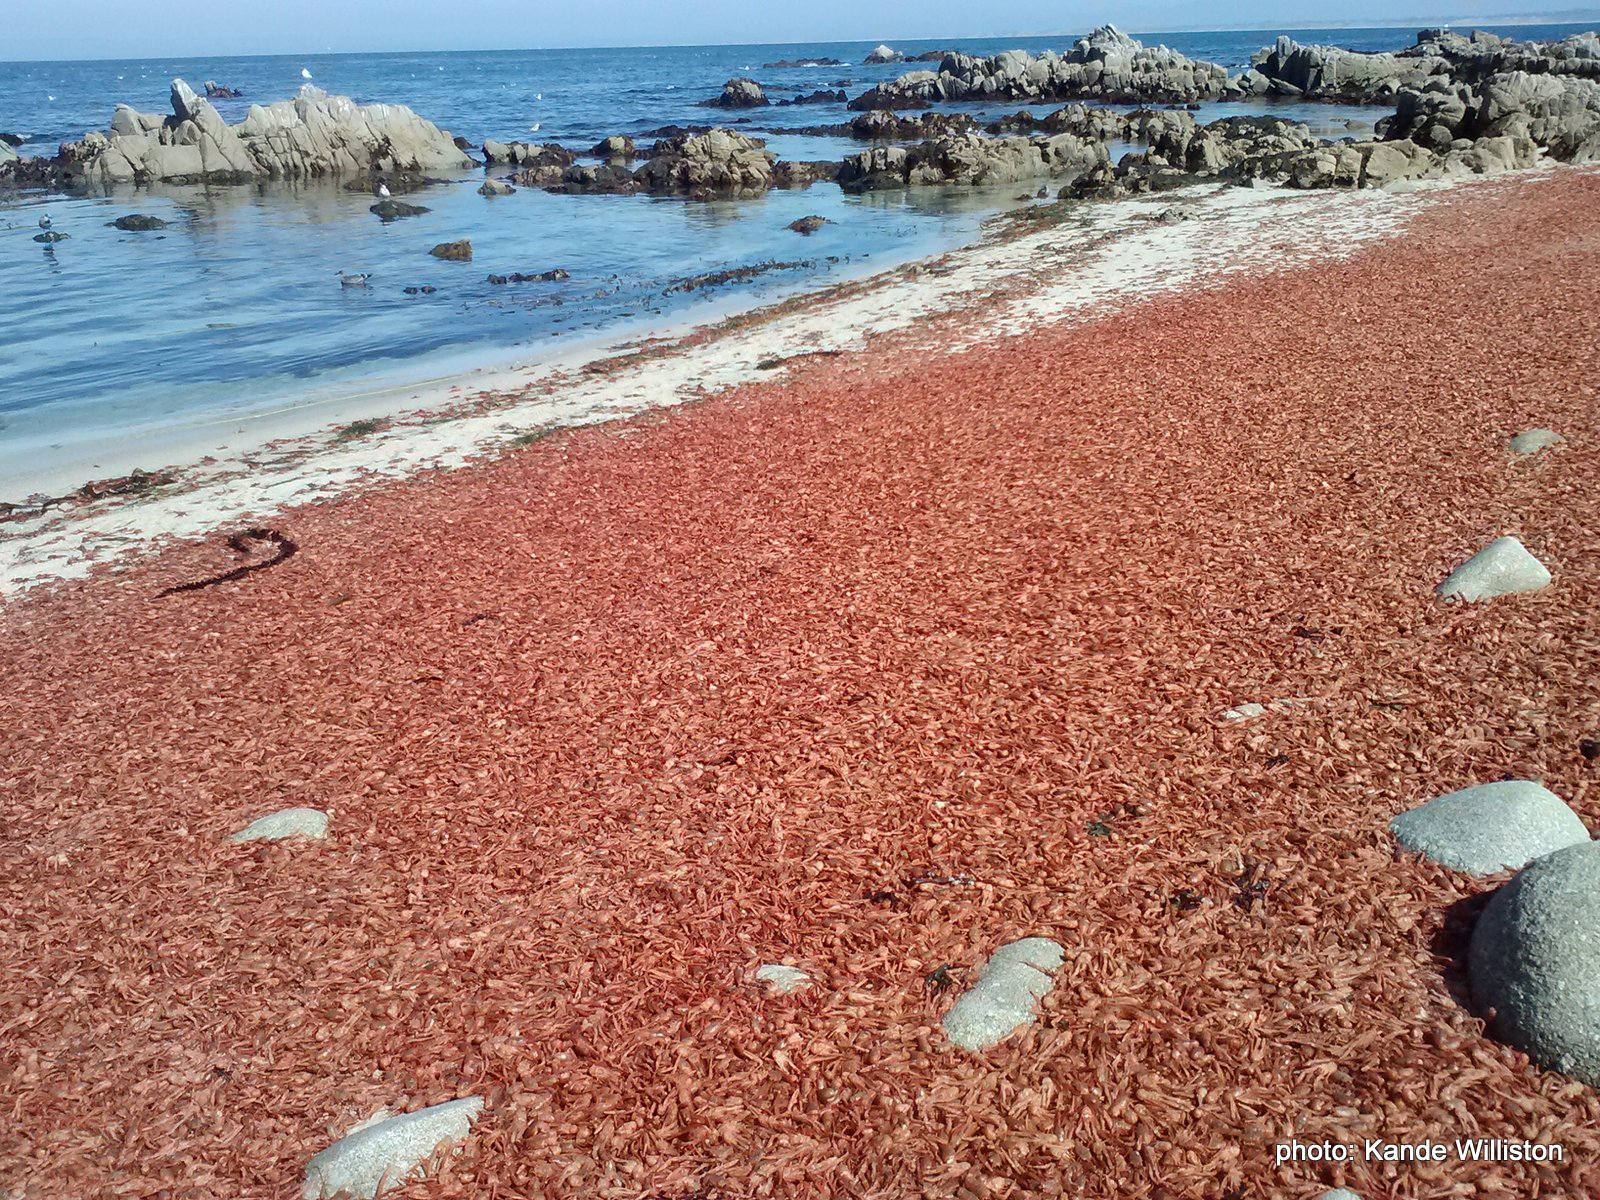 red crabs monterey, red crabs monterey die-off, red crabs monterey mass die-off, red crabs wash ashore along beaches in monterey, el nino red crabs monterey, red crabs monterey el nino strong, Dead red crabs on the shore of Pacific Grove